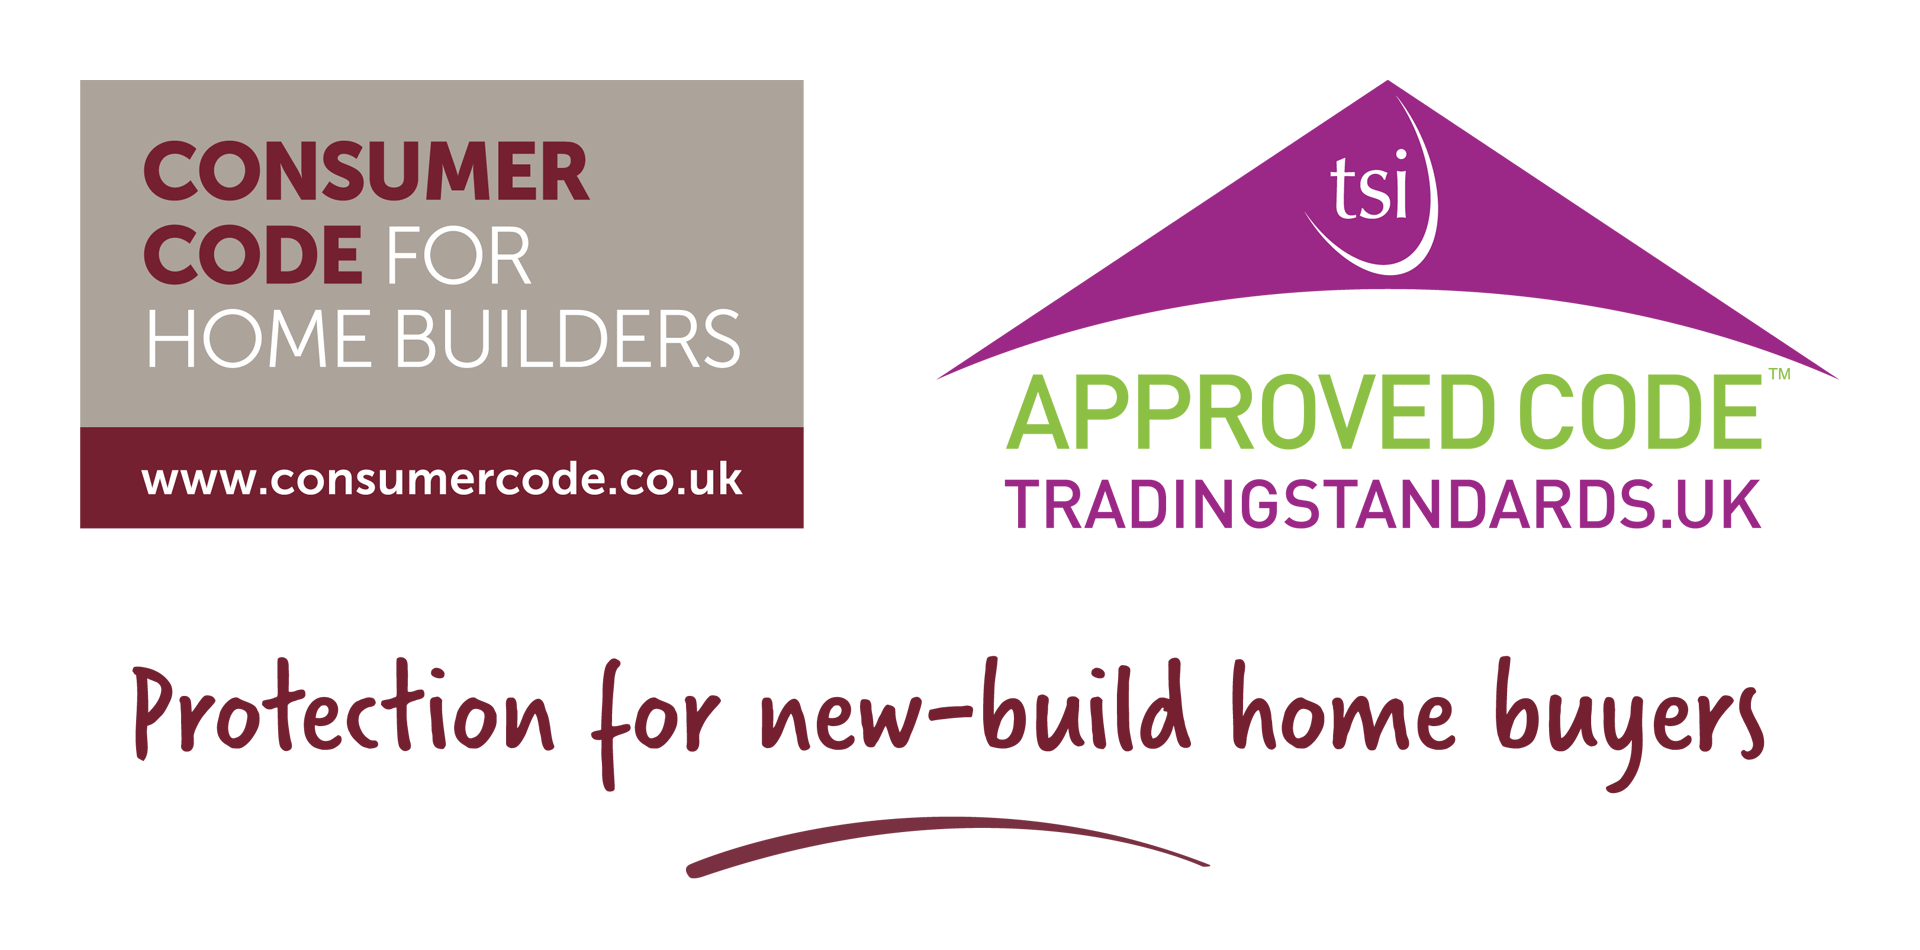 The Consumer Code for Home Builders